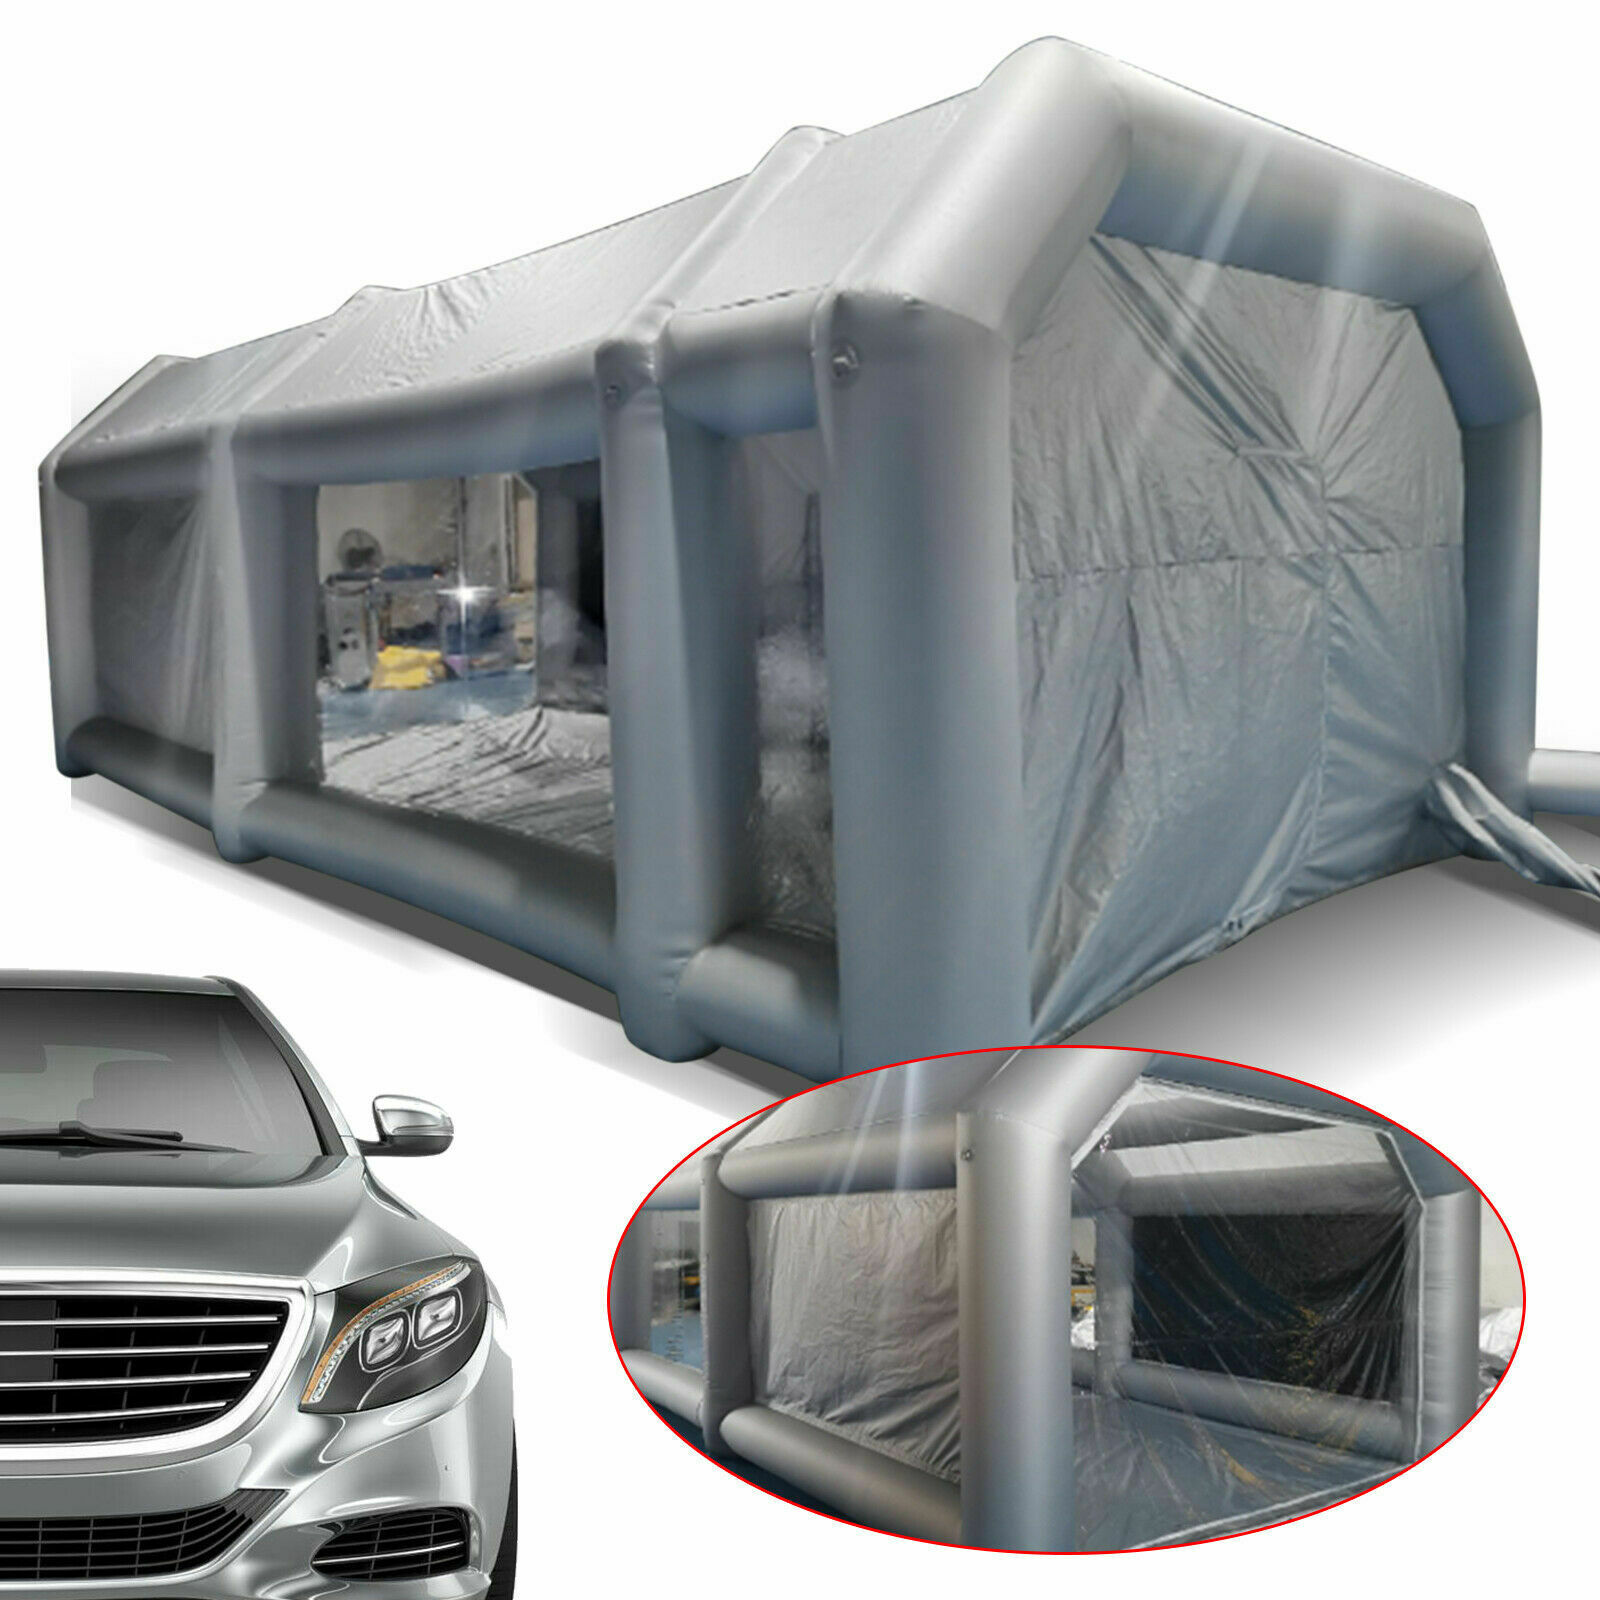 Portable Inflatable Spray Paint Booth Tent Mobile For Car 2air Filter 26x15x10ft